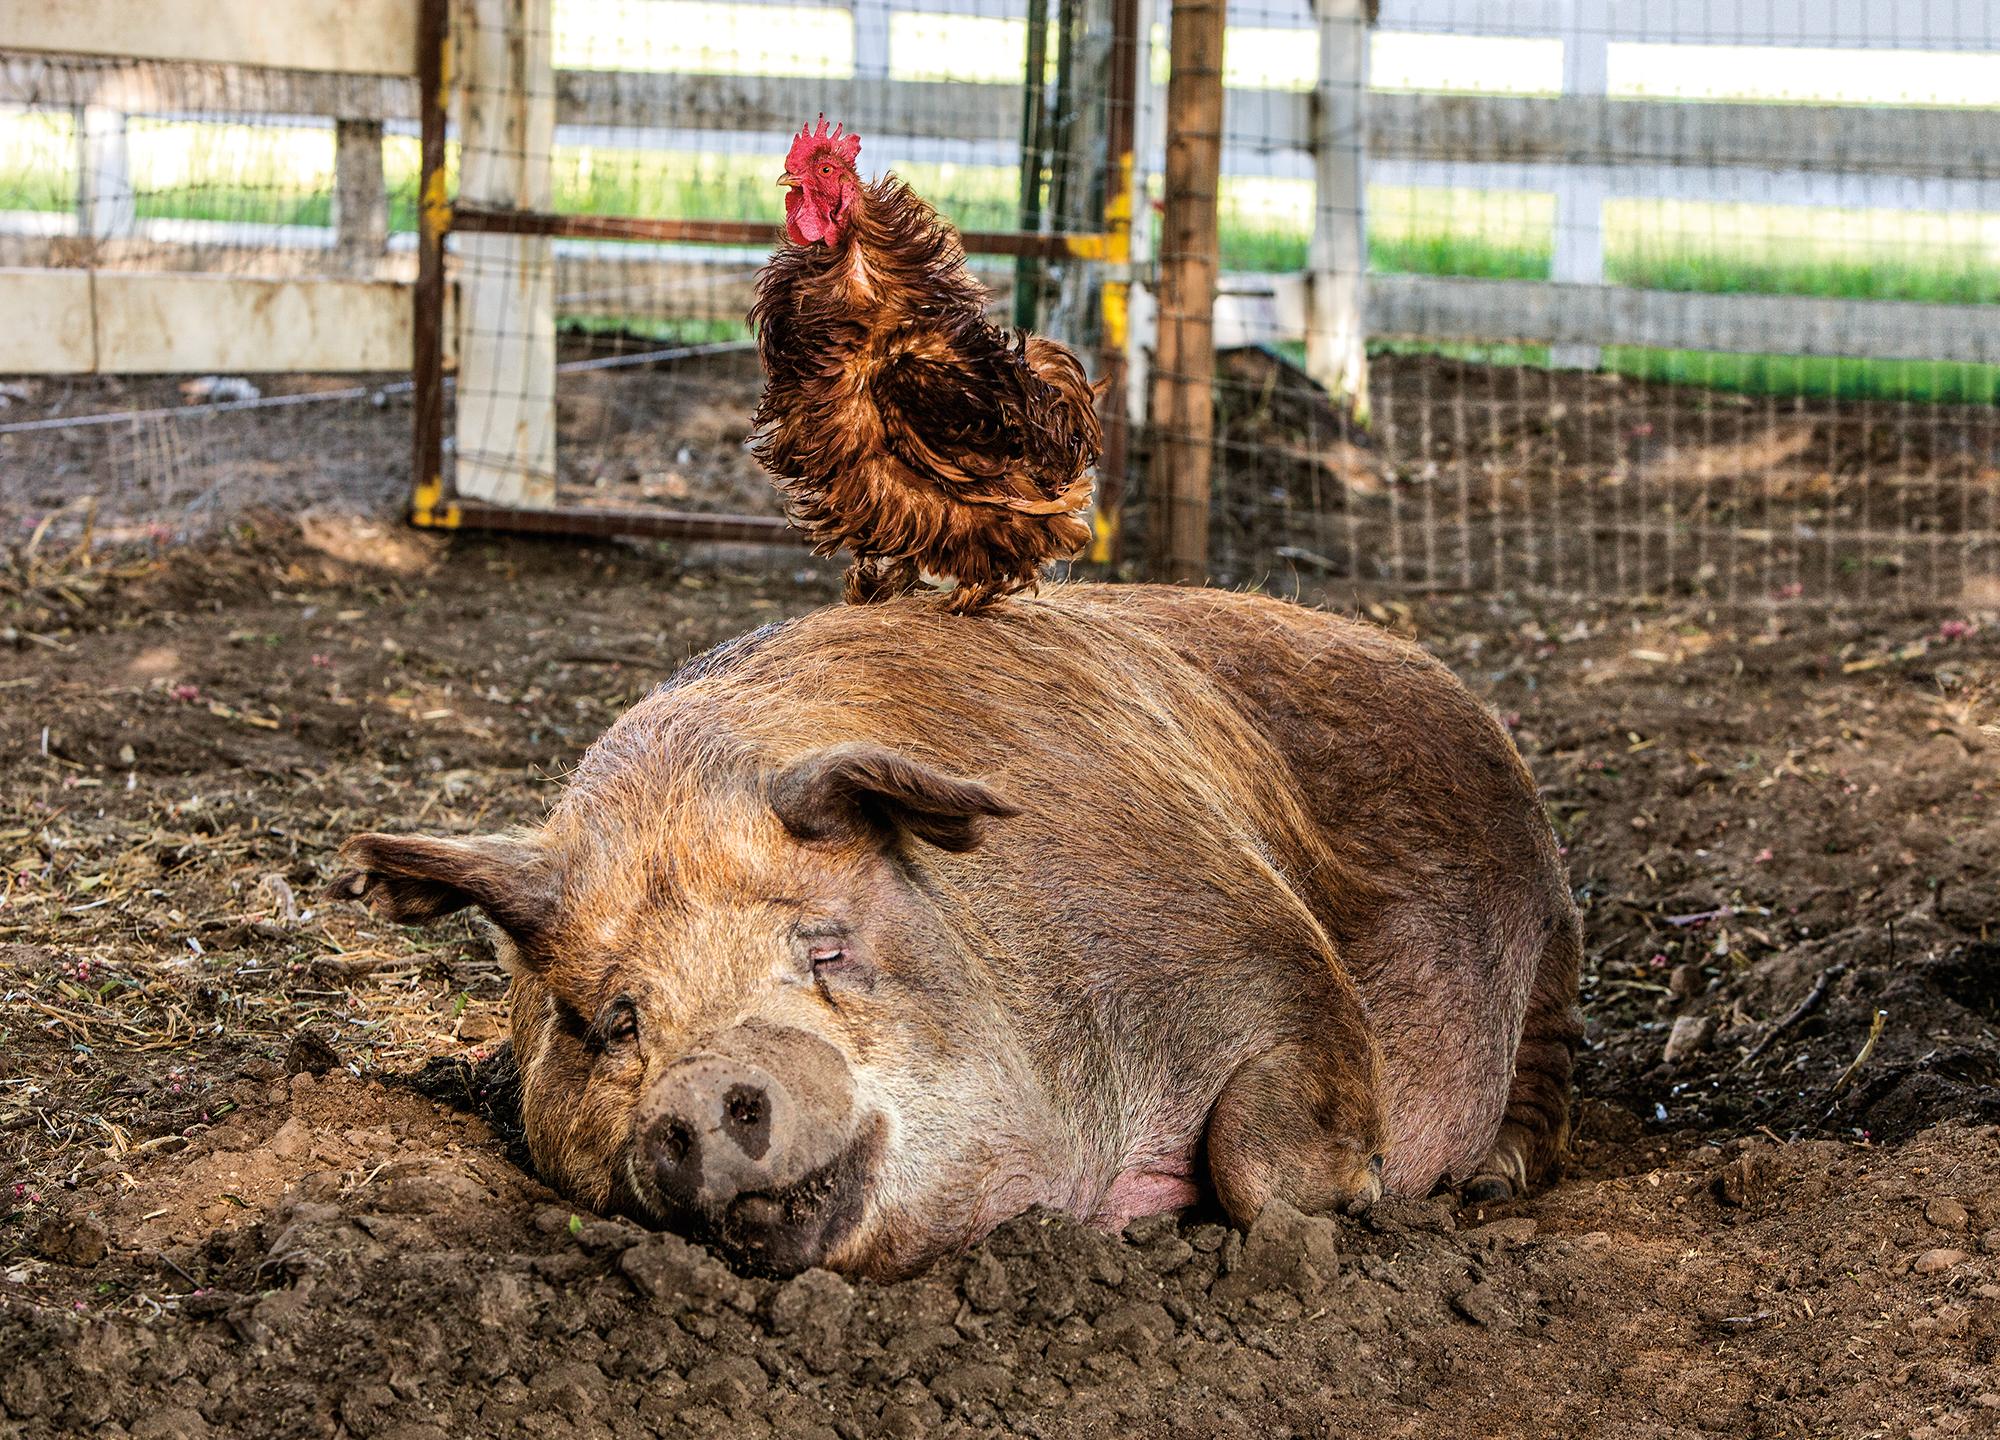 A pig and a rooster relaxes on John and Molly's farm.